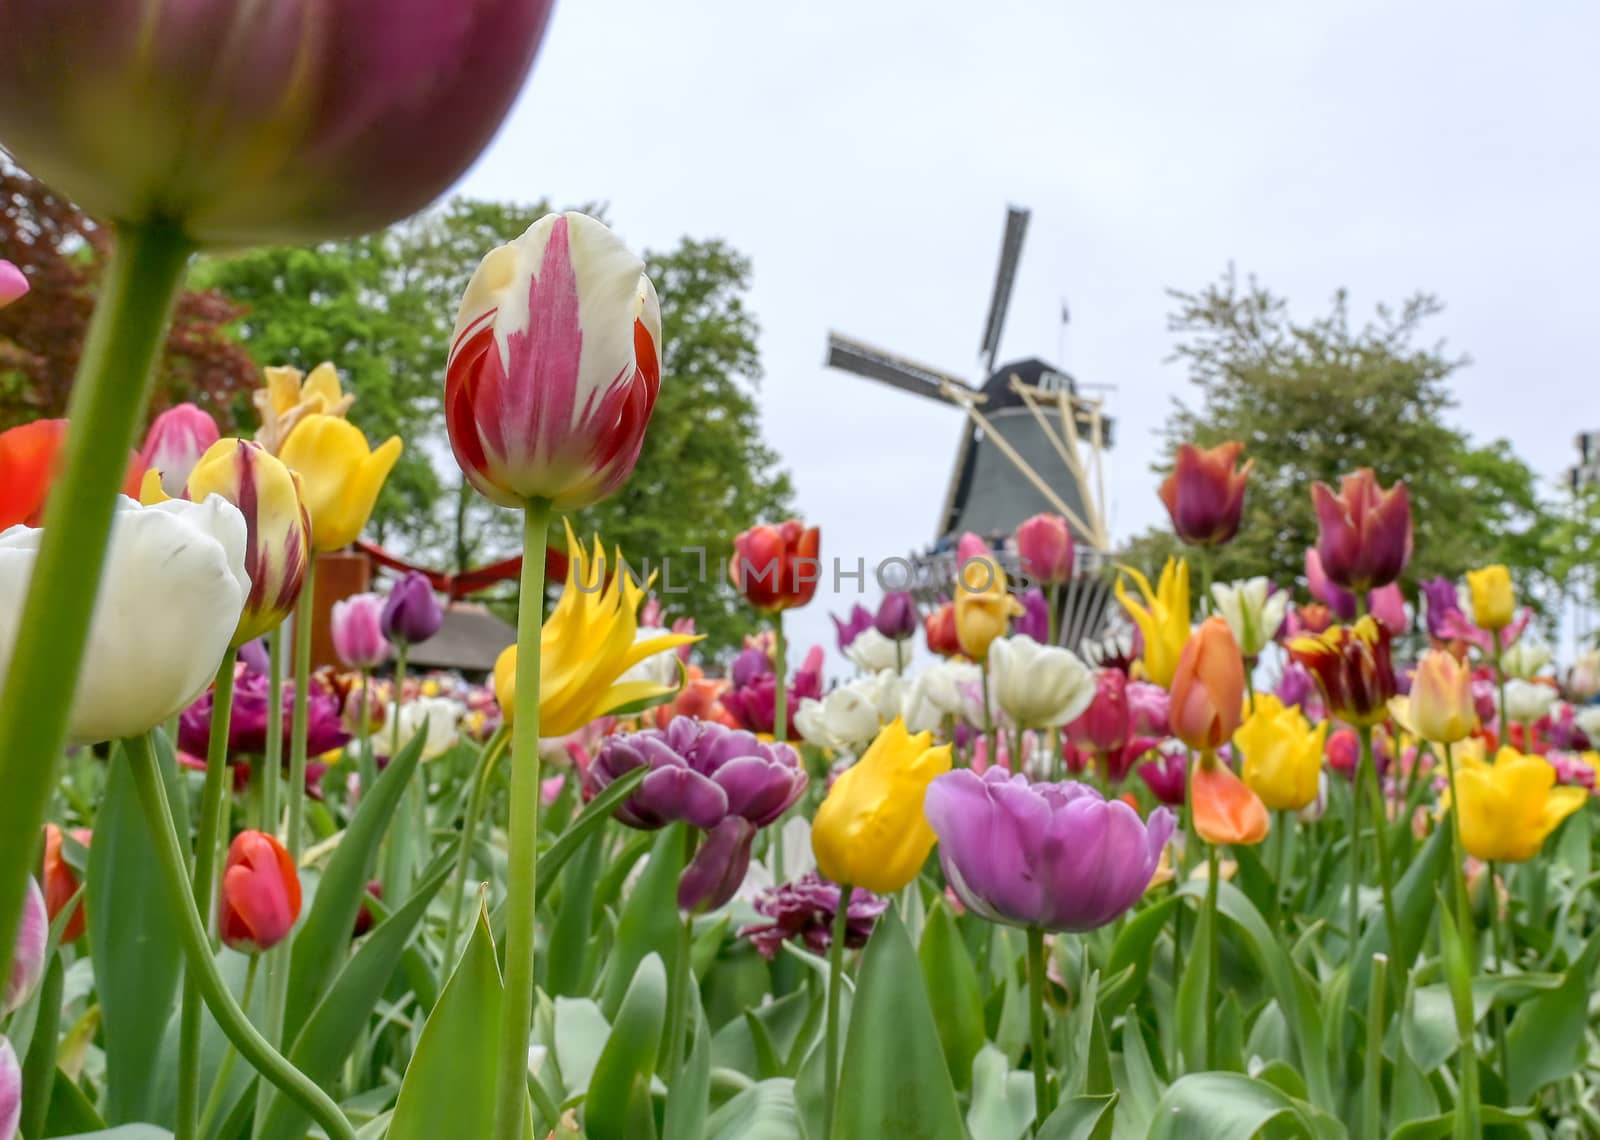 Tulips surrounding a windmill in the Netherlands.